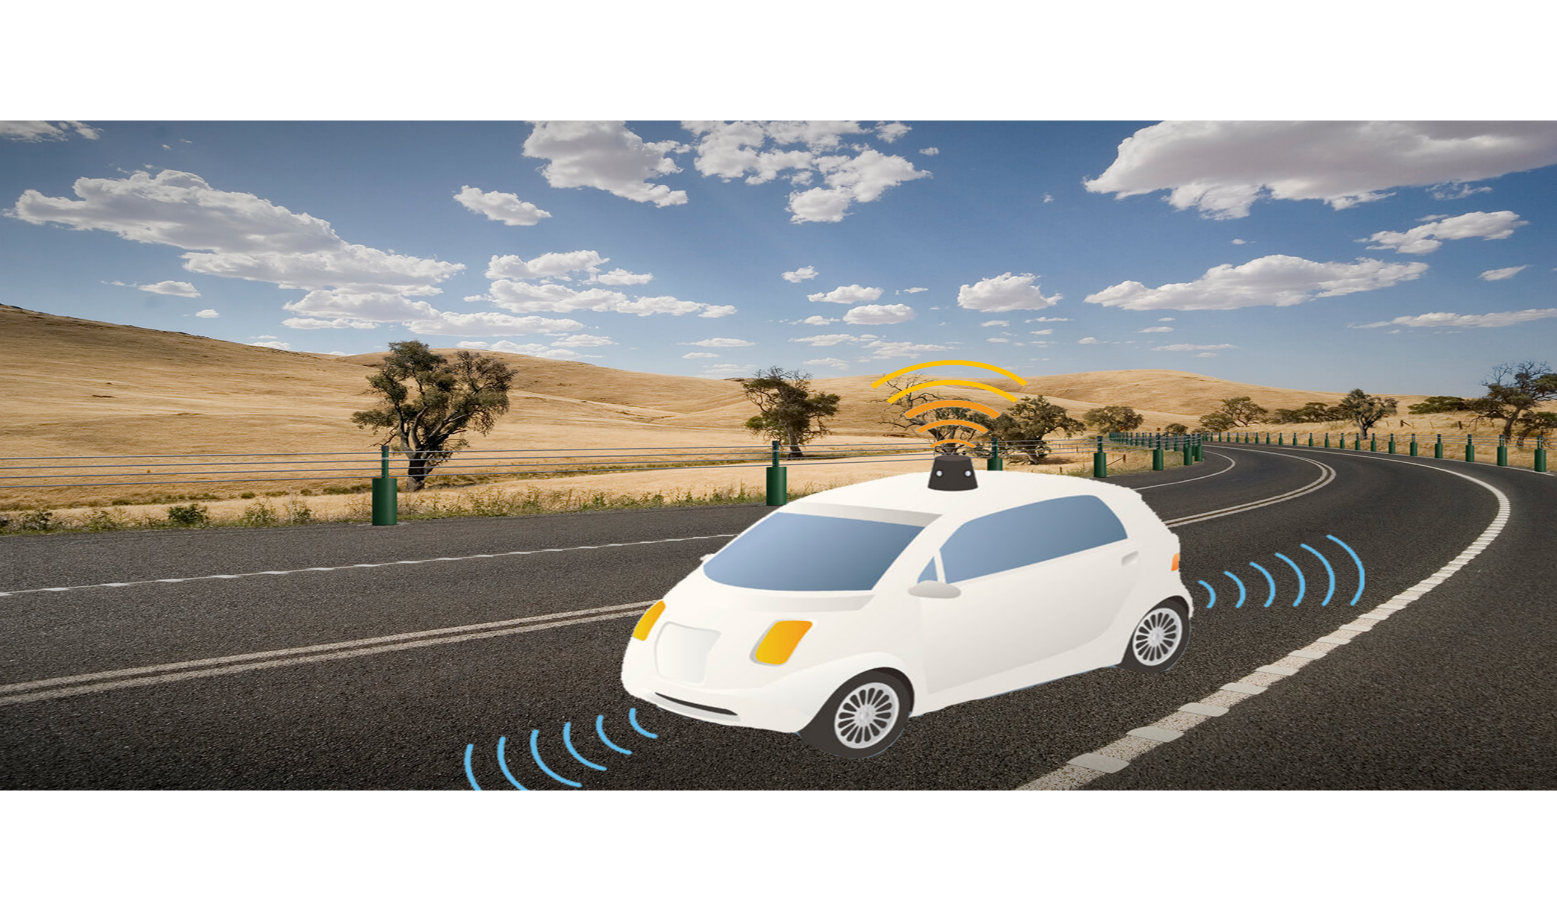 Intelligent Agents in self driving cars